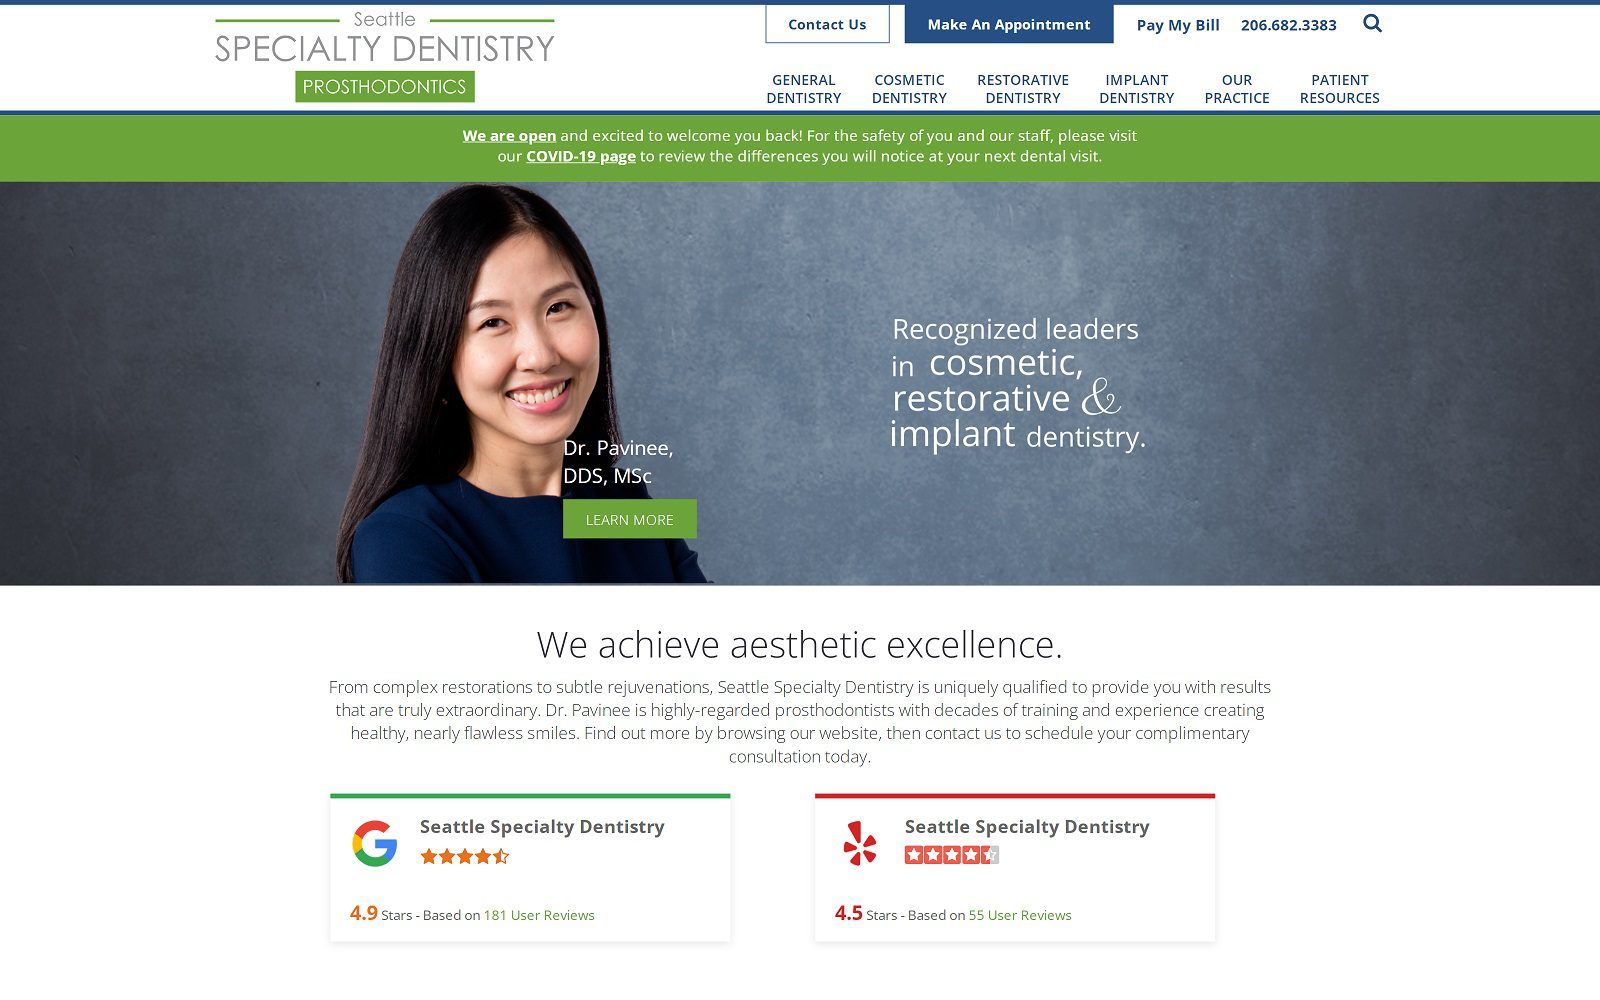 The screenshot of seattle specialty dentistry website